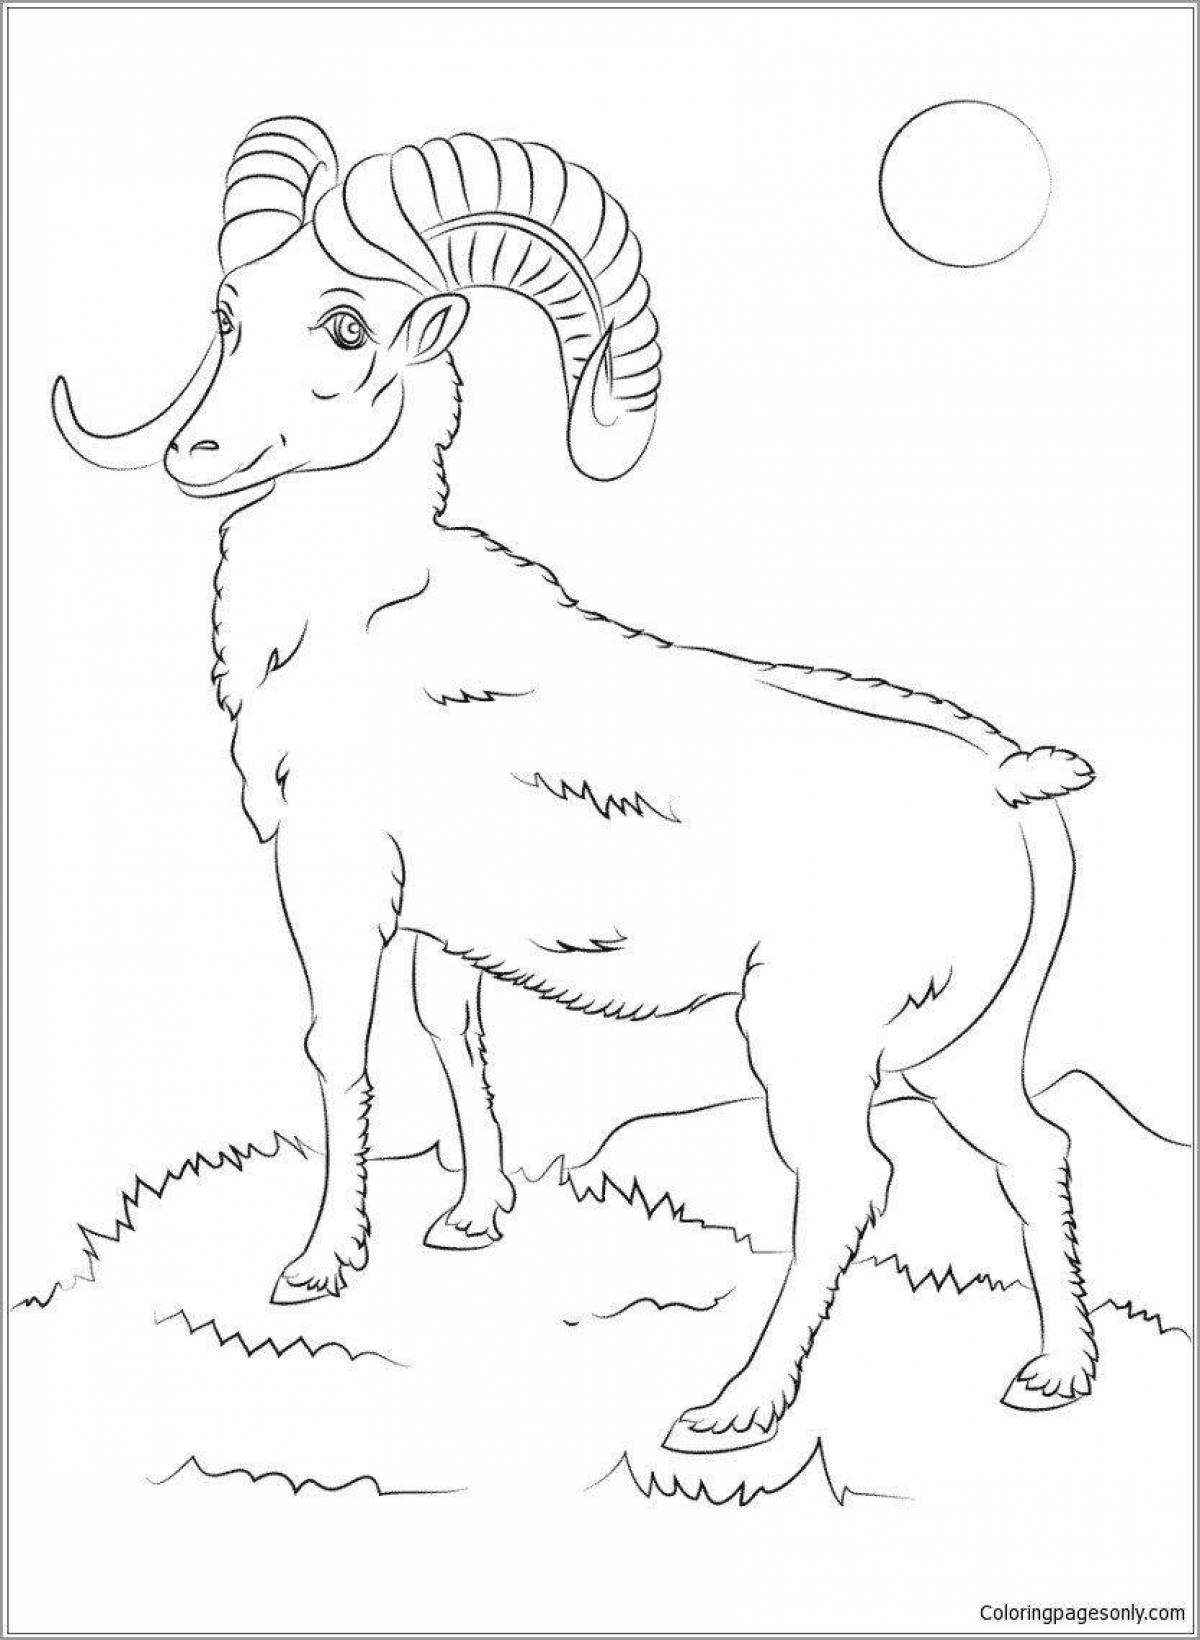 Living mountain goat coloring book